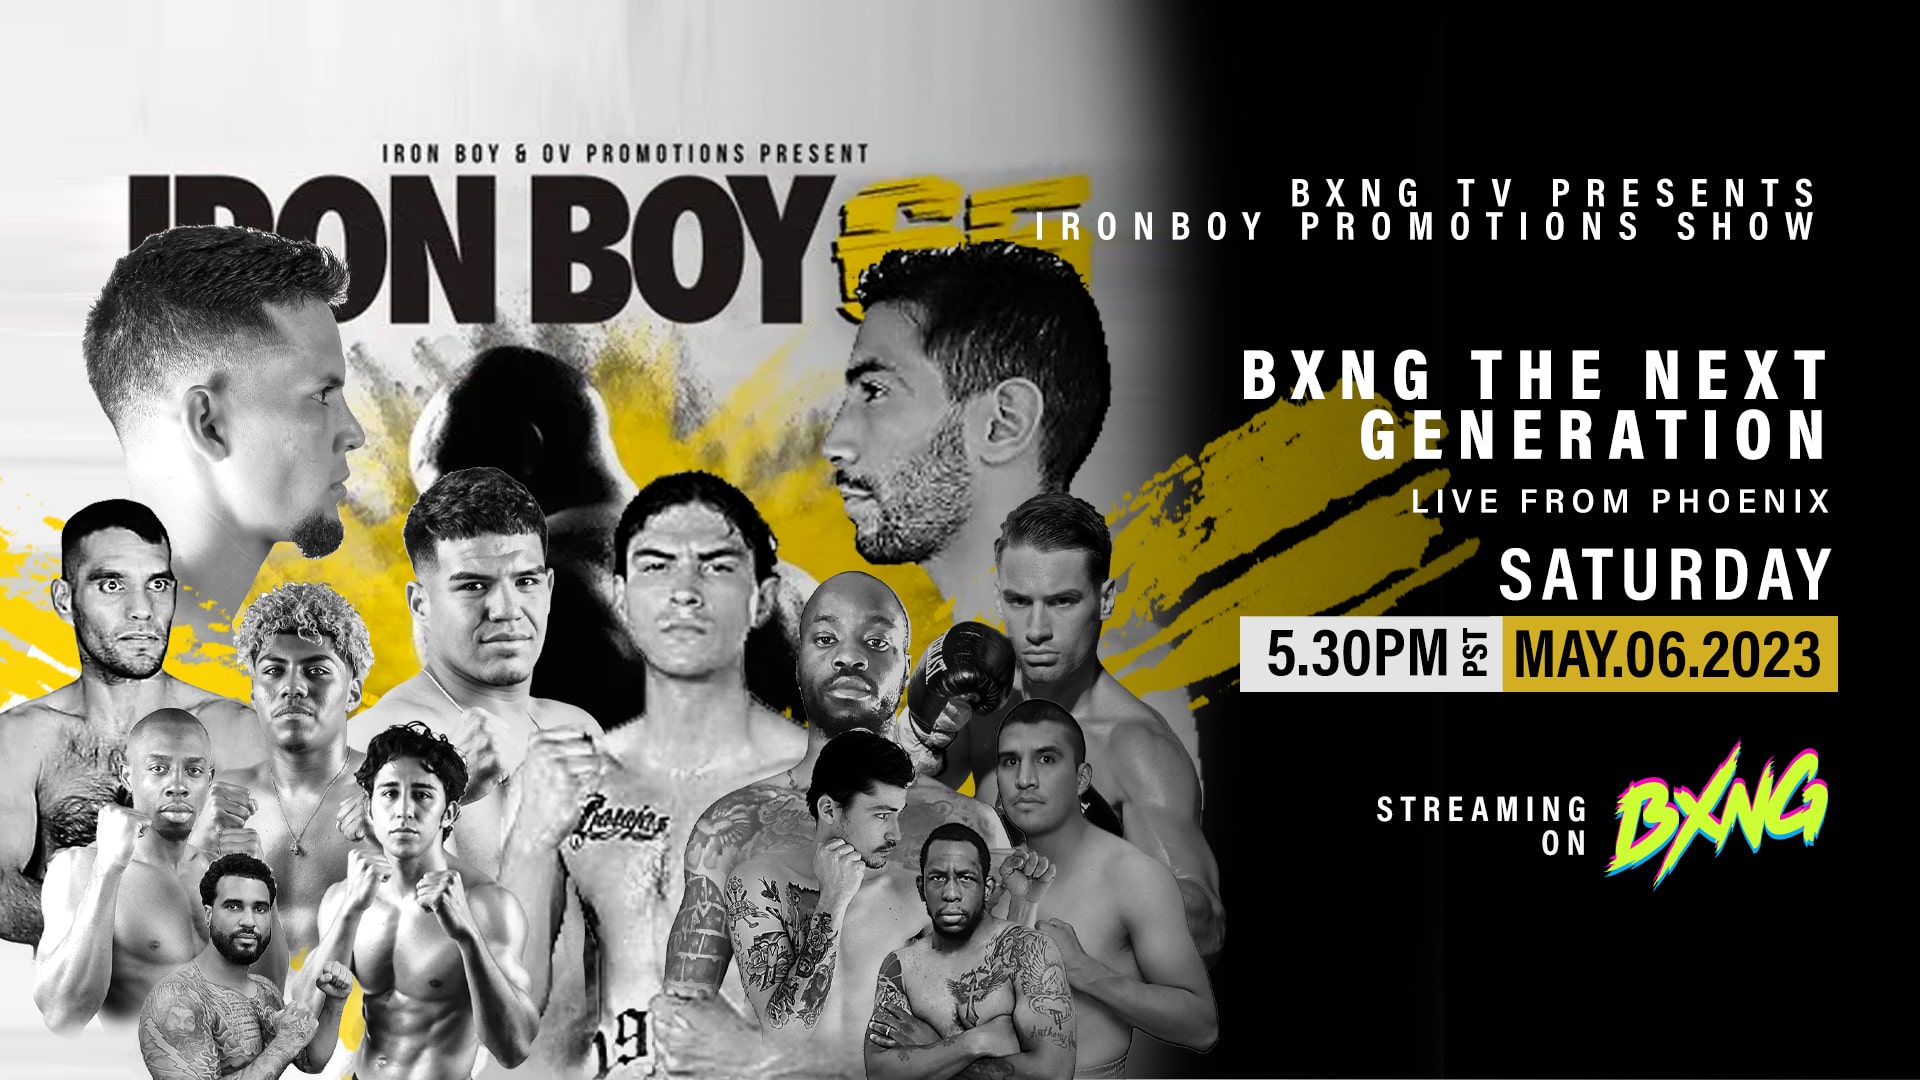 BXNG TV Presents Ironboy Promotions Show Live Stream 05/06/23